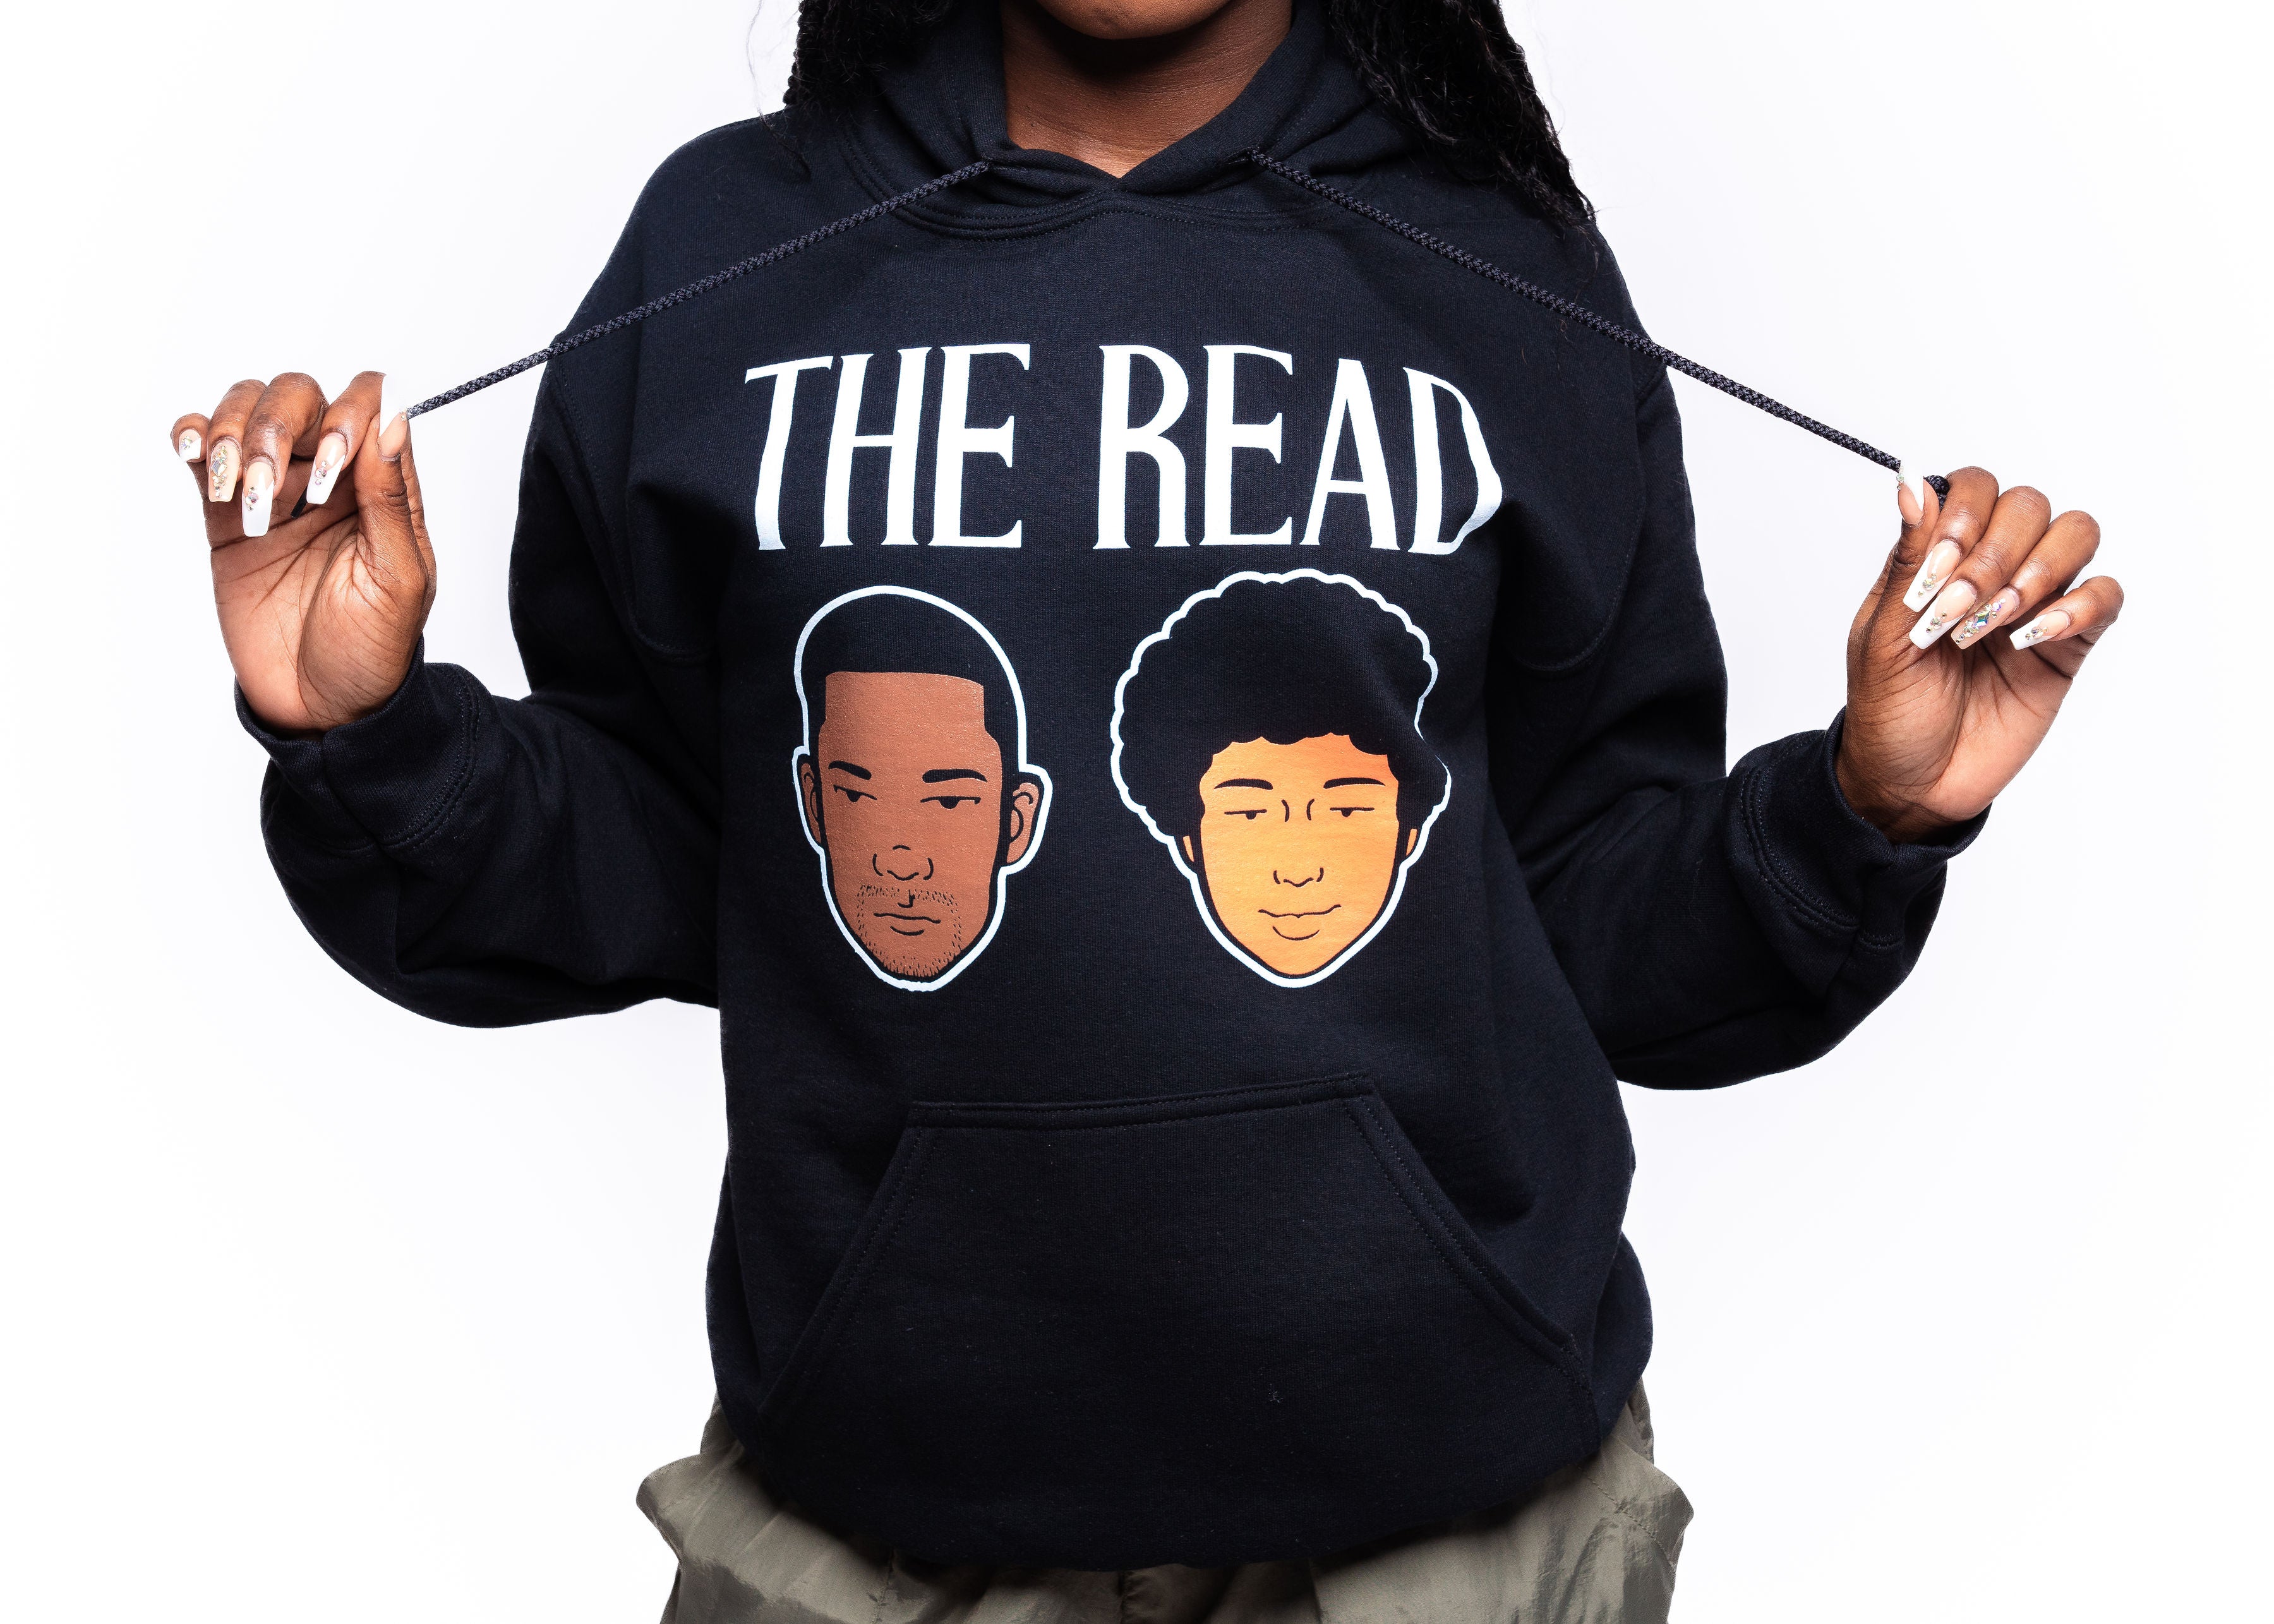 Brb while we sob at how STUNNING y'all look in your RealPod merch